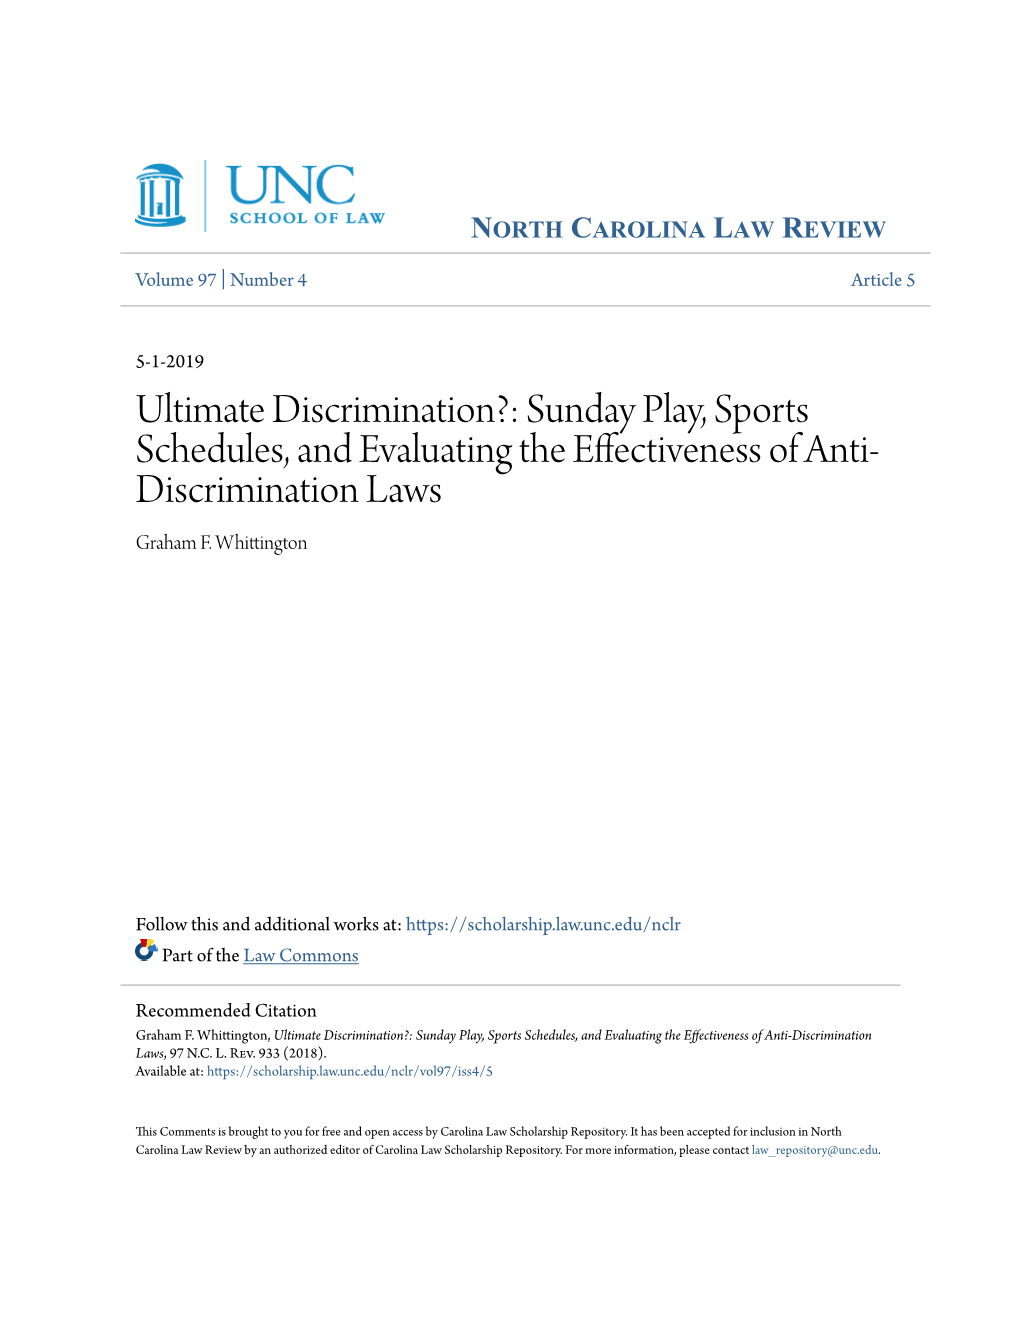 Ultimate Discrimination?: Sunday Play, Sports Schedules, and Evaluating the Effectiveness of Anti- Discrimination Laws Graham F